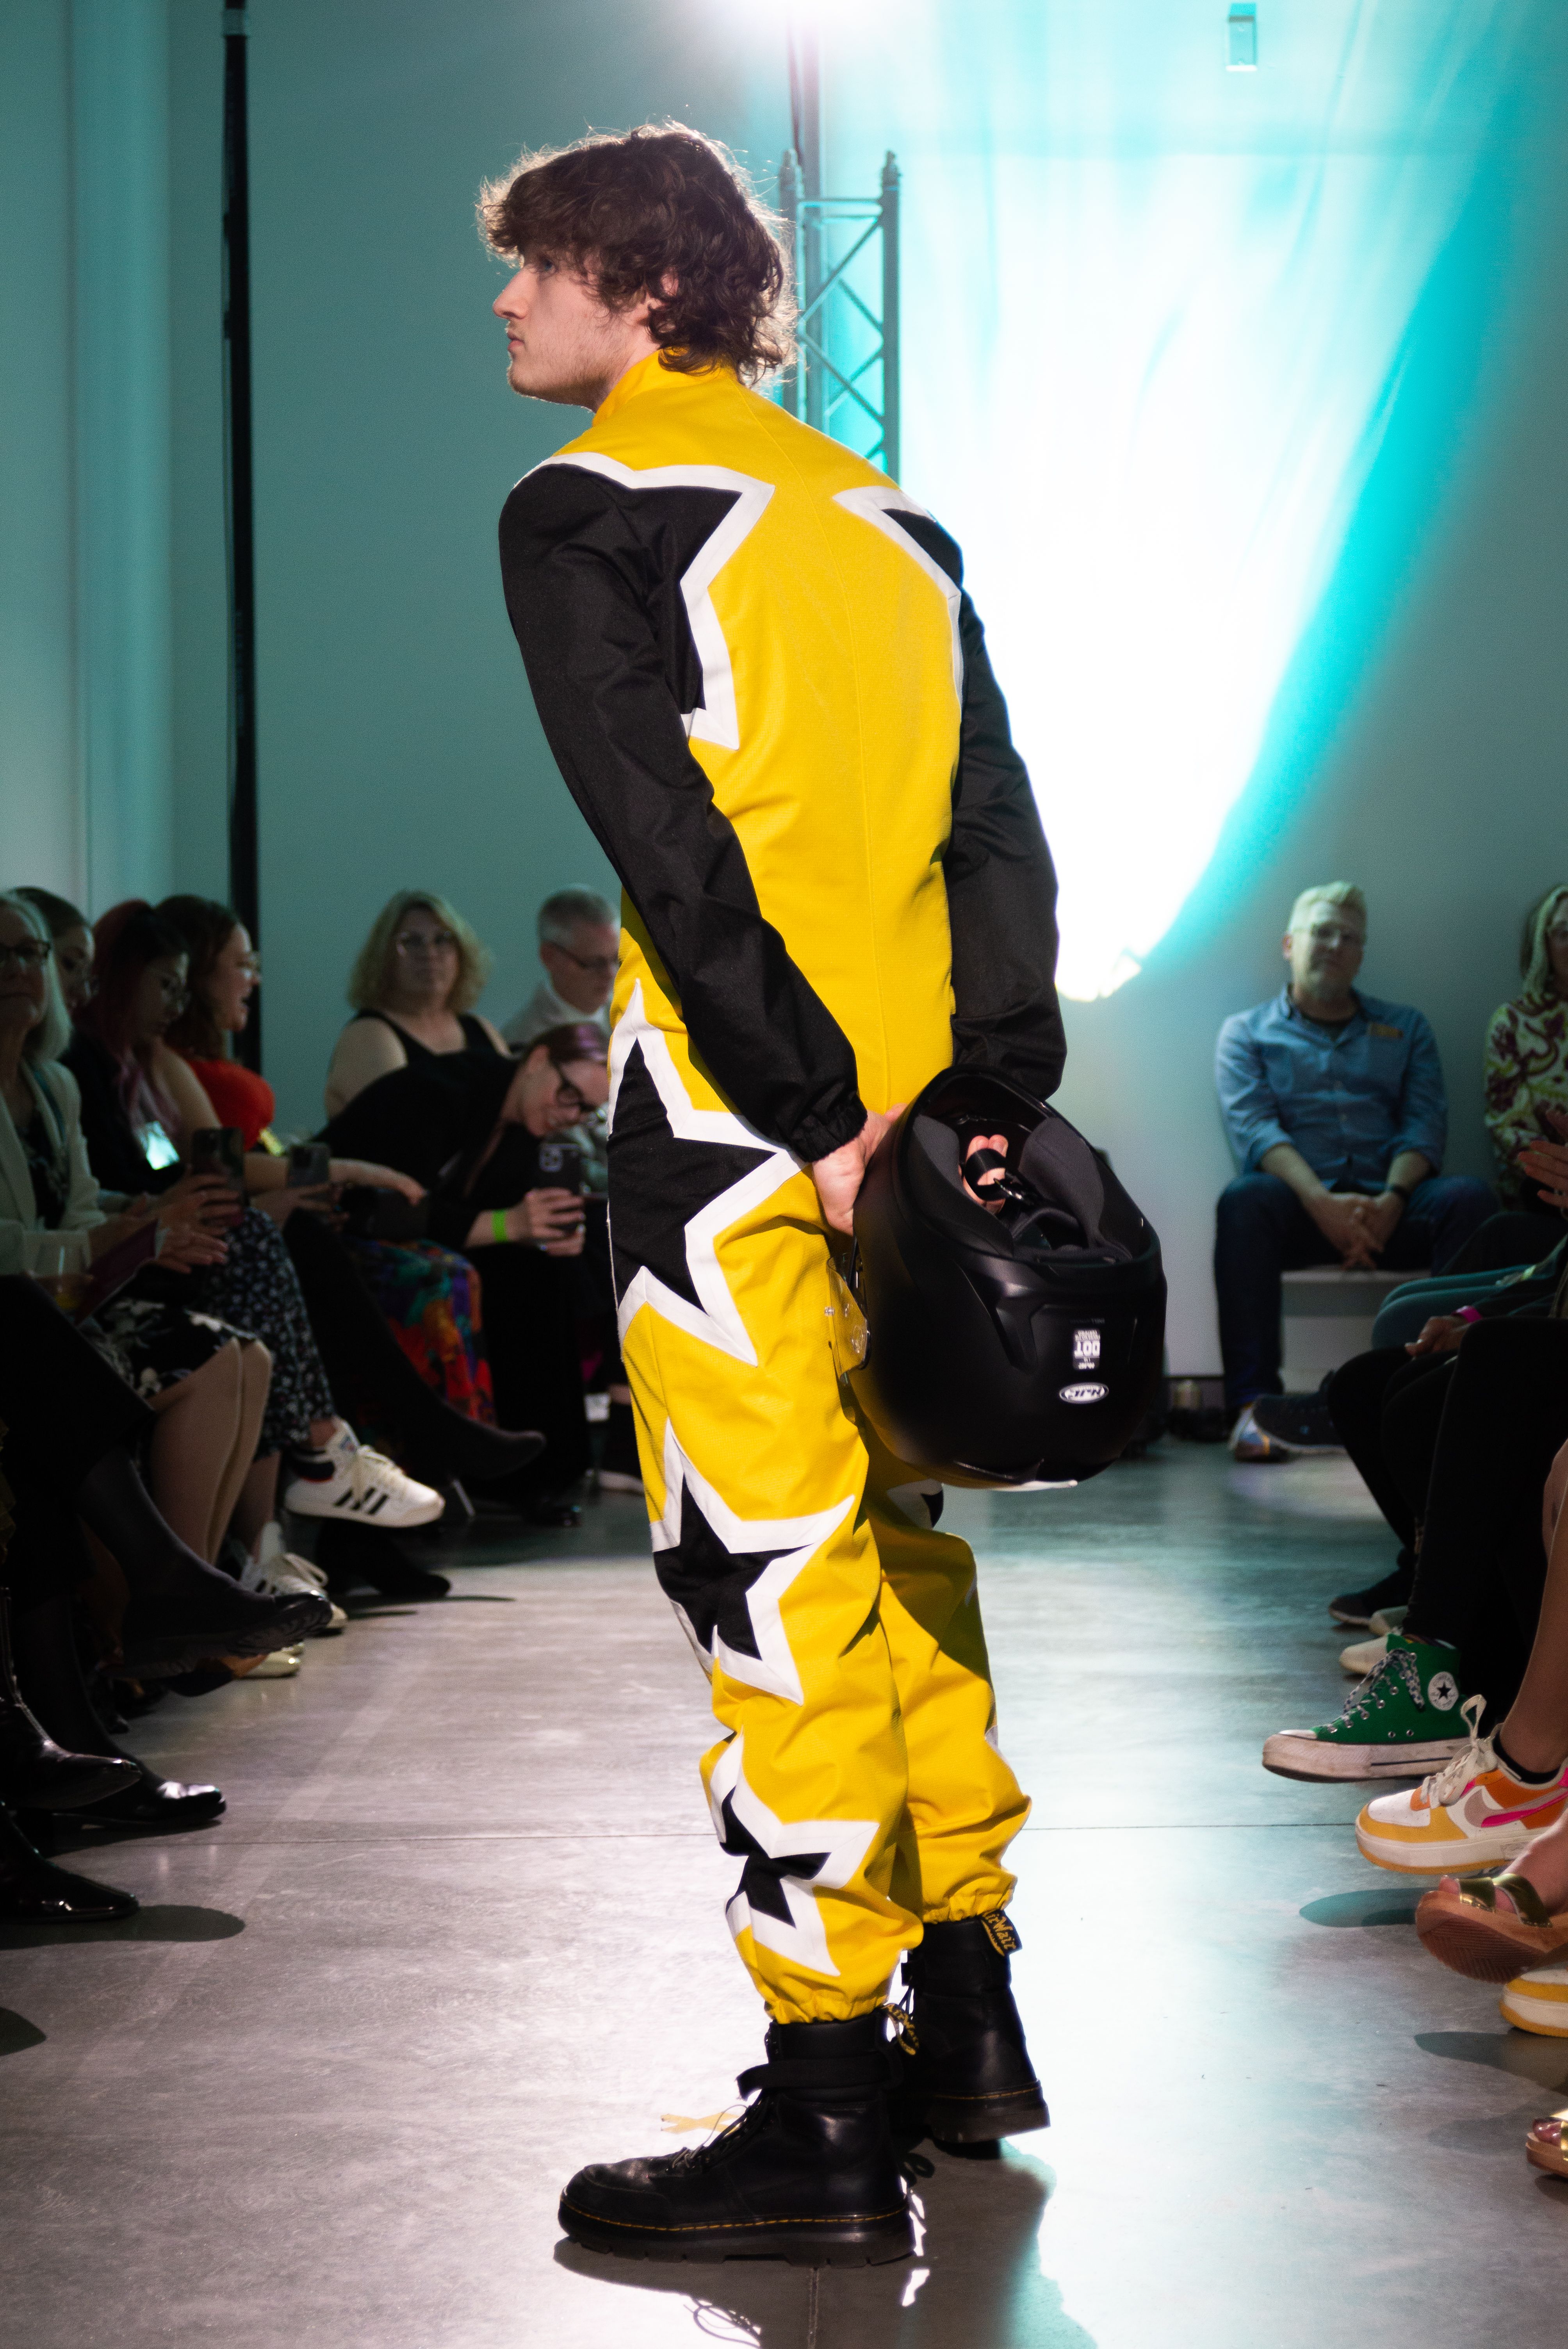 A model on the runway wearing a yellow jumpsuit with black stars down the legs, holding a motorcycle helmet.